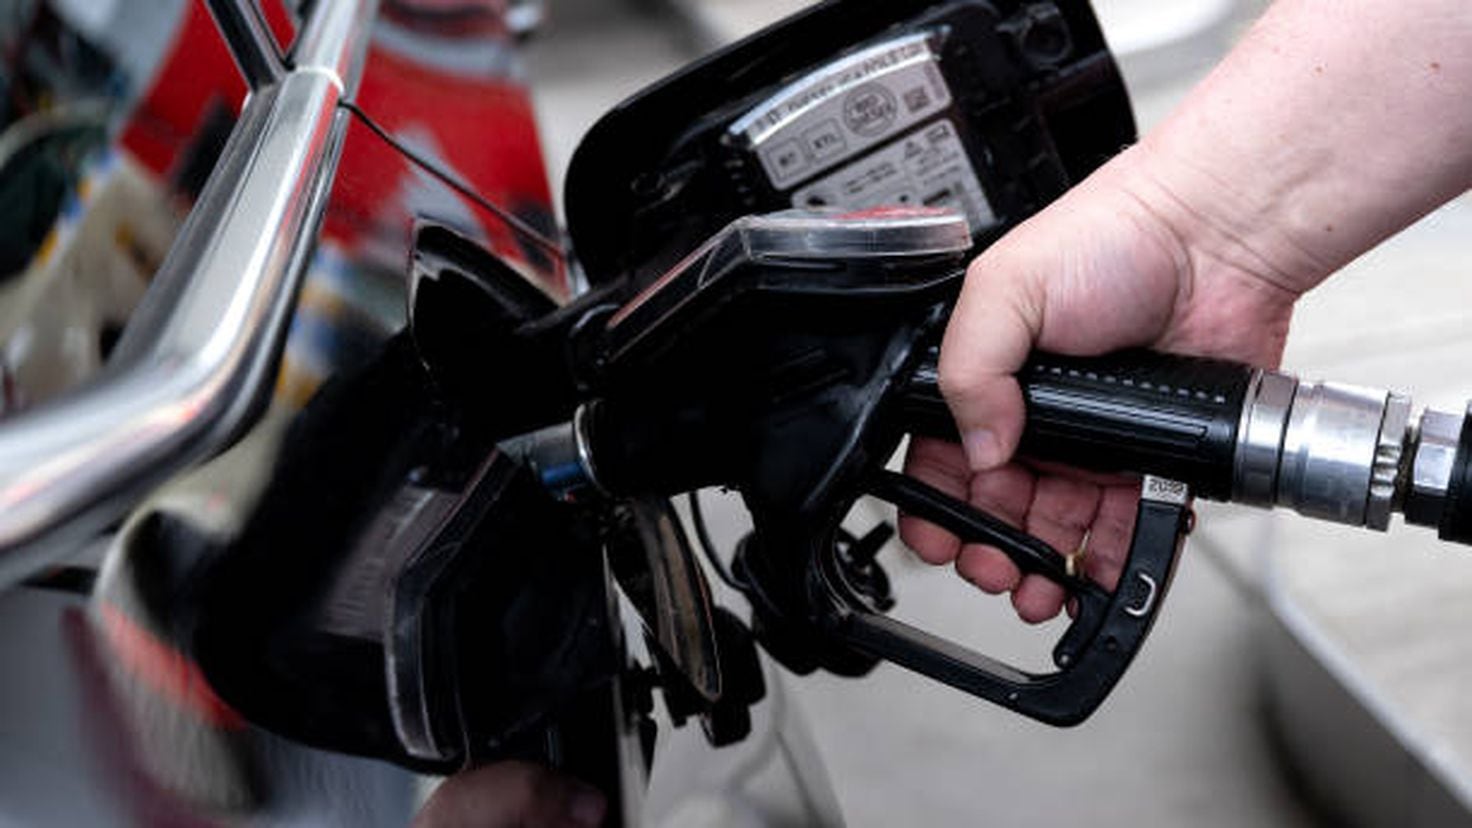 gas-tax-rebate-north-carolina-lawmakers-propose-a-200-refund-for